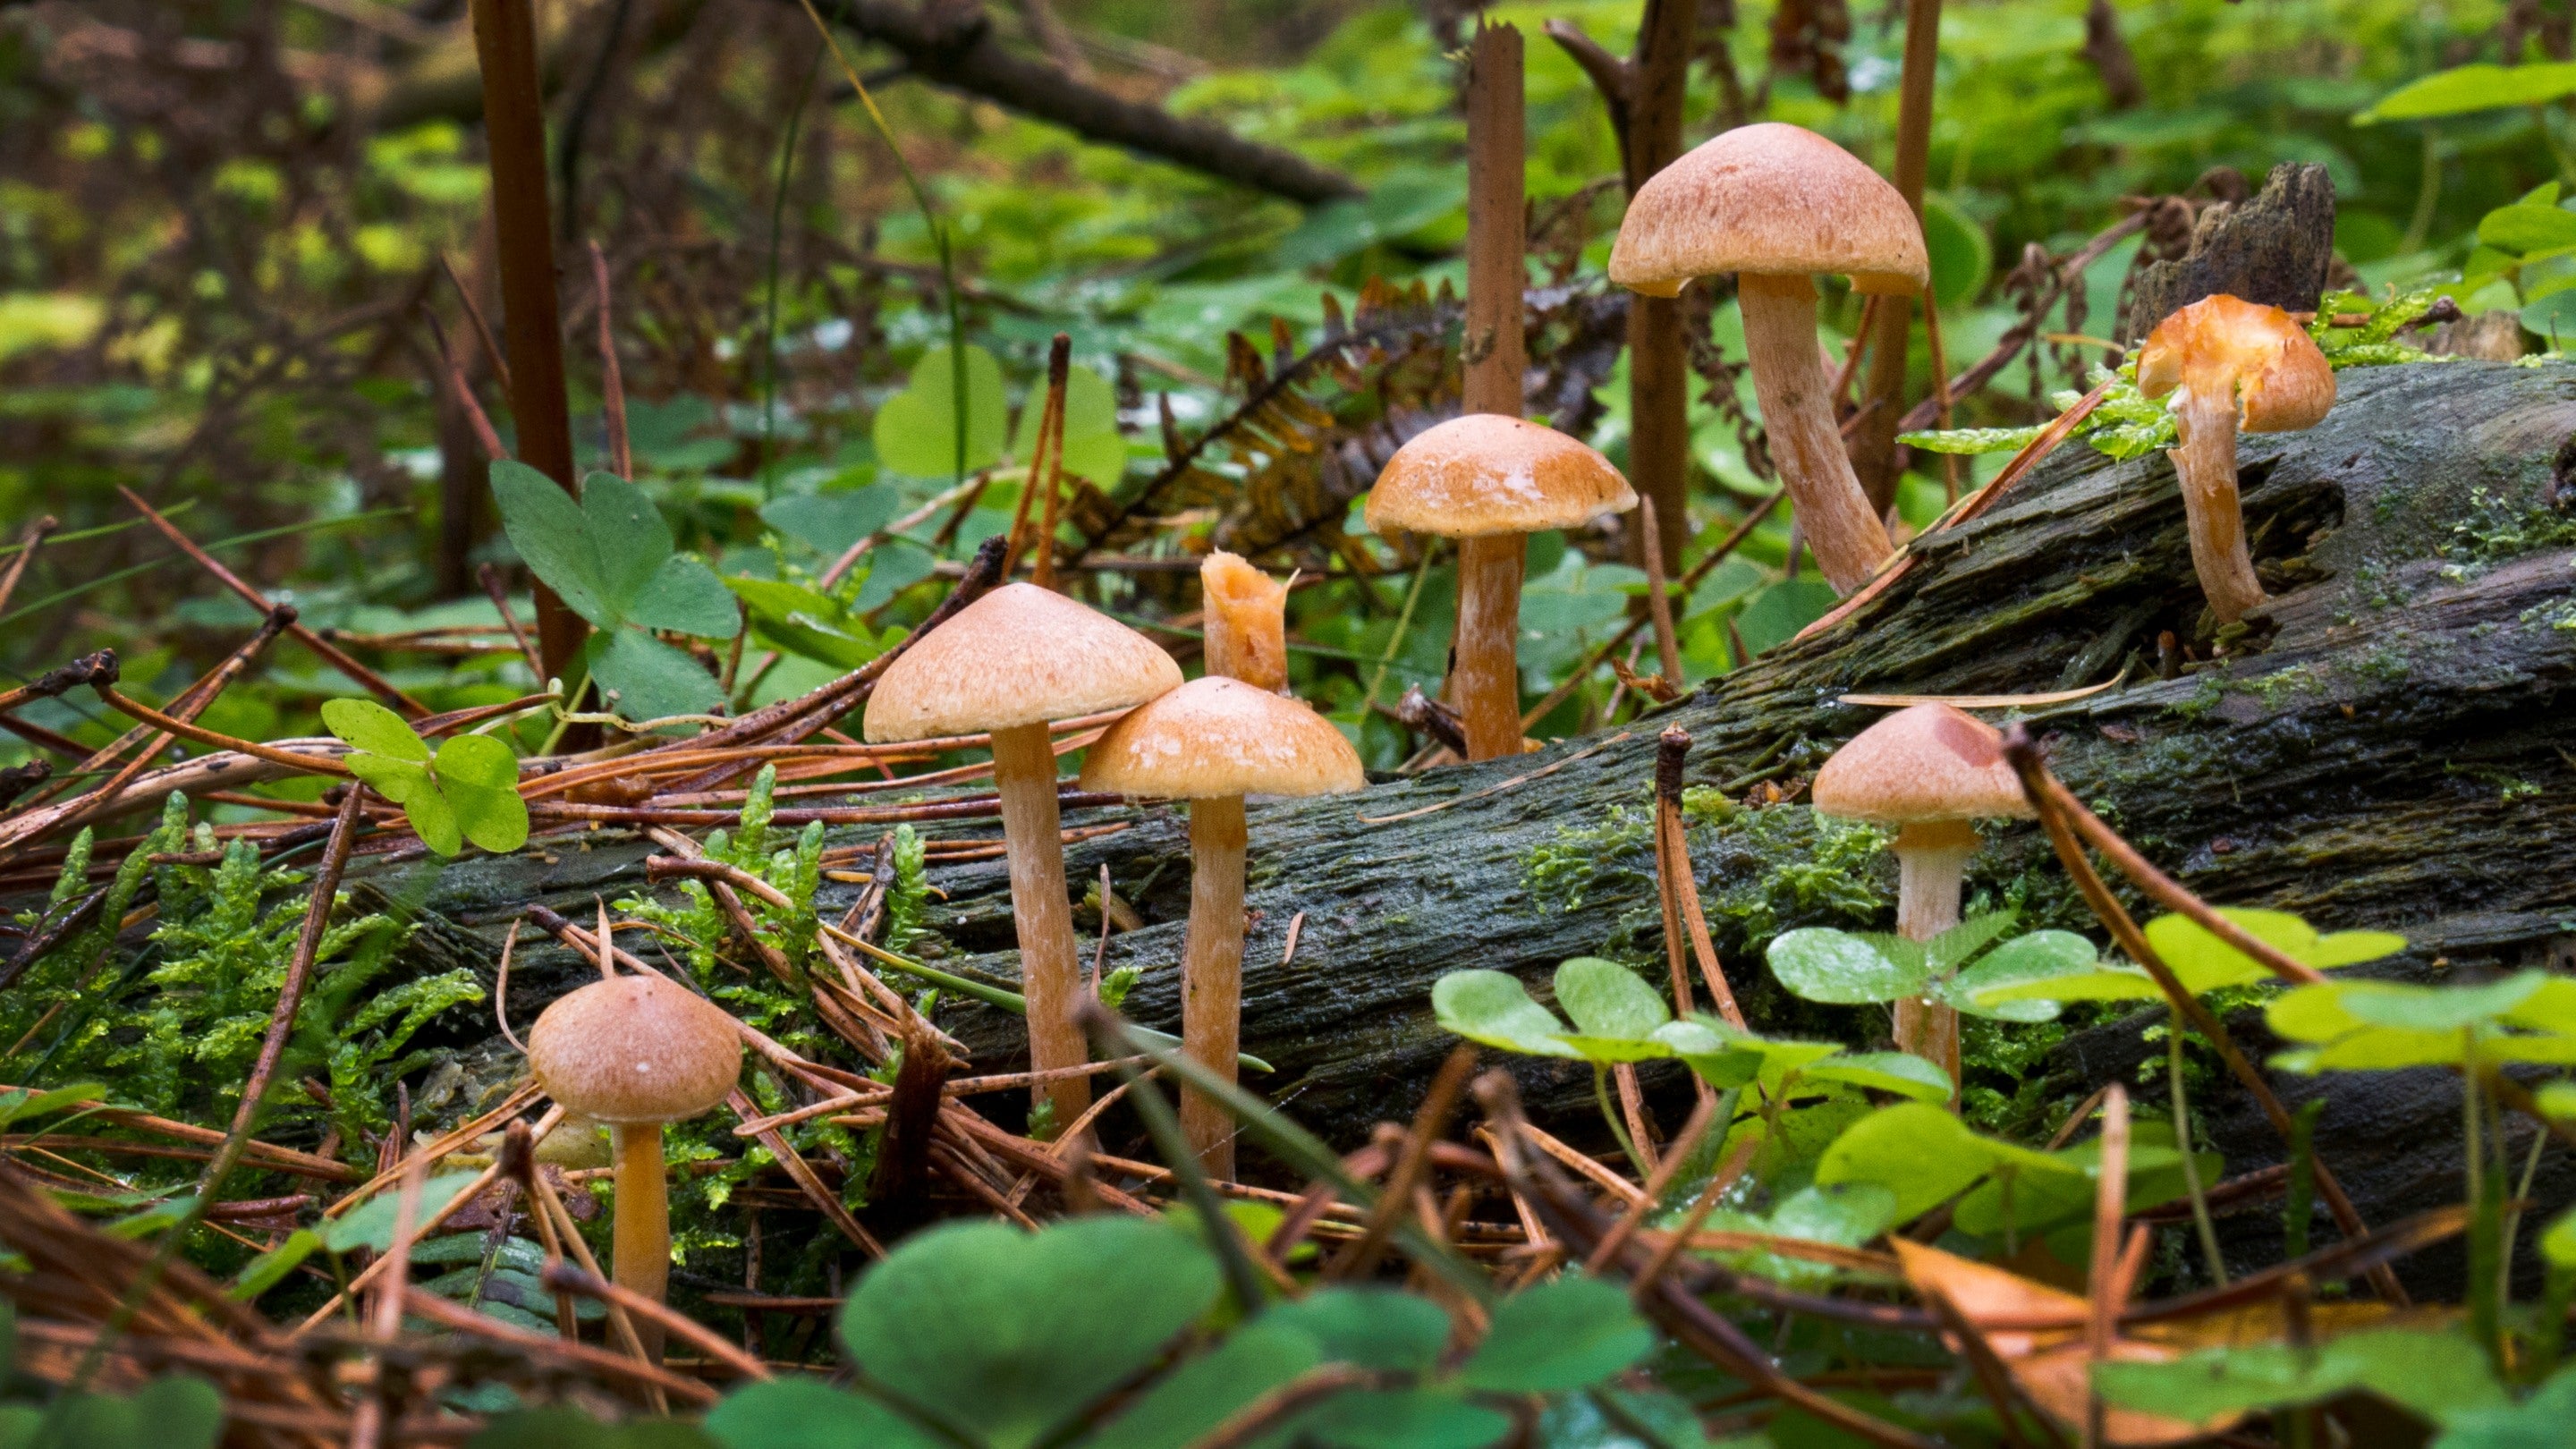  Evolution of Fungi: Questions and Answers 